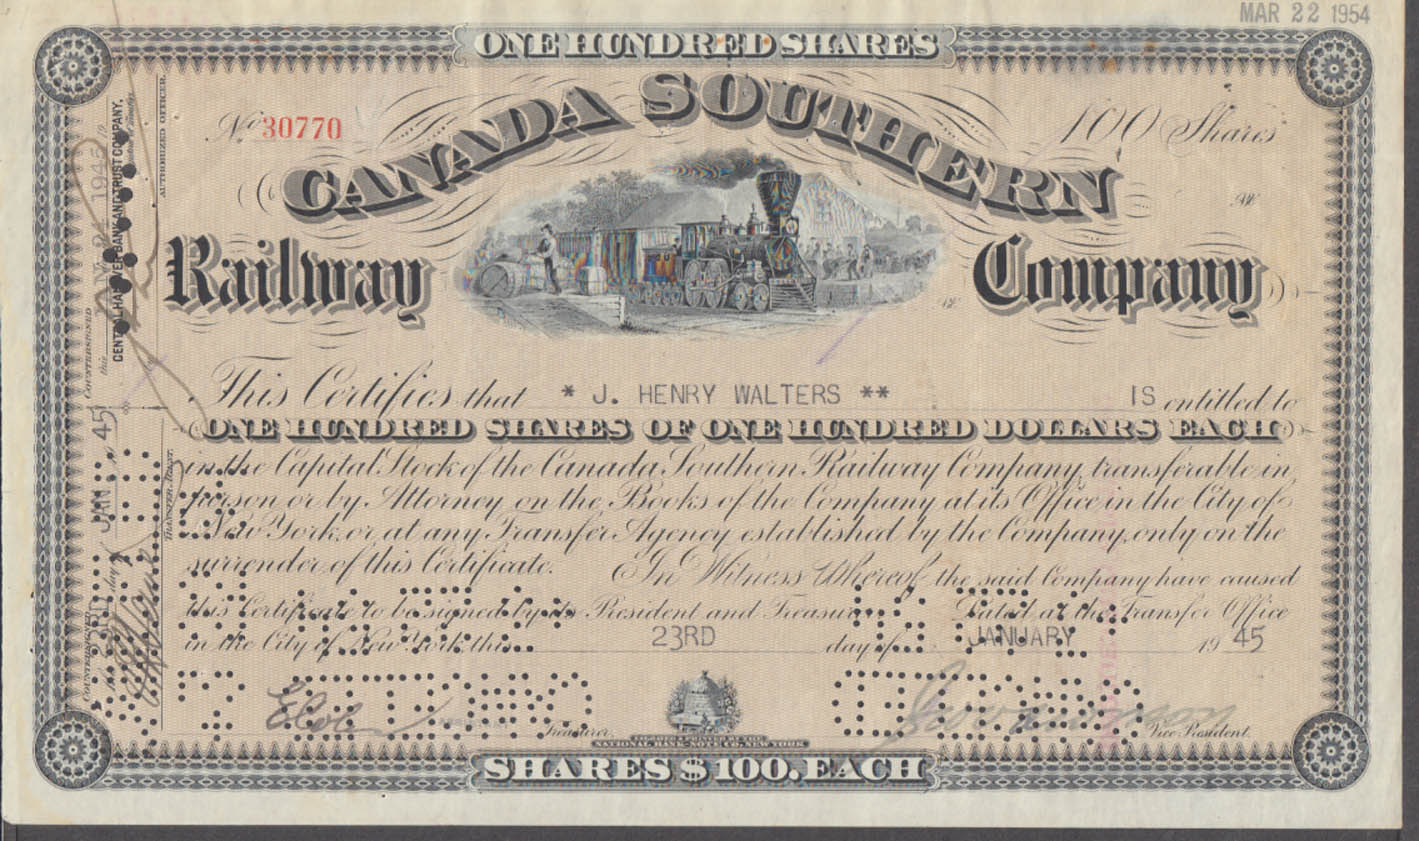 Canada Southern Railway Company Stock Certificate 